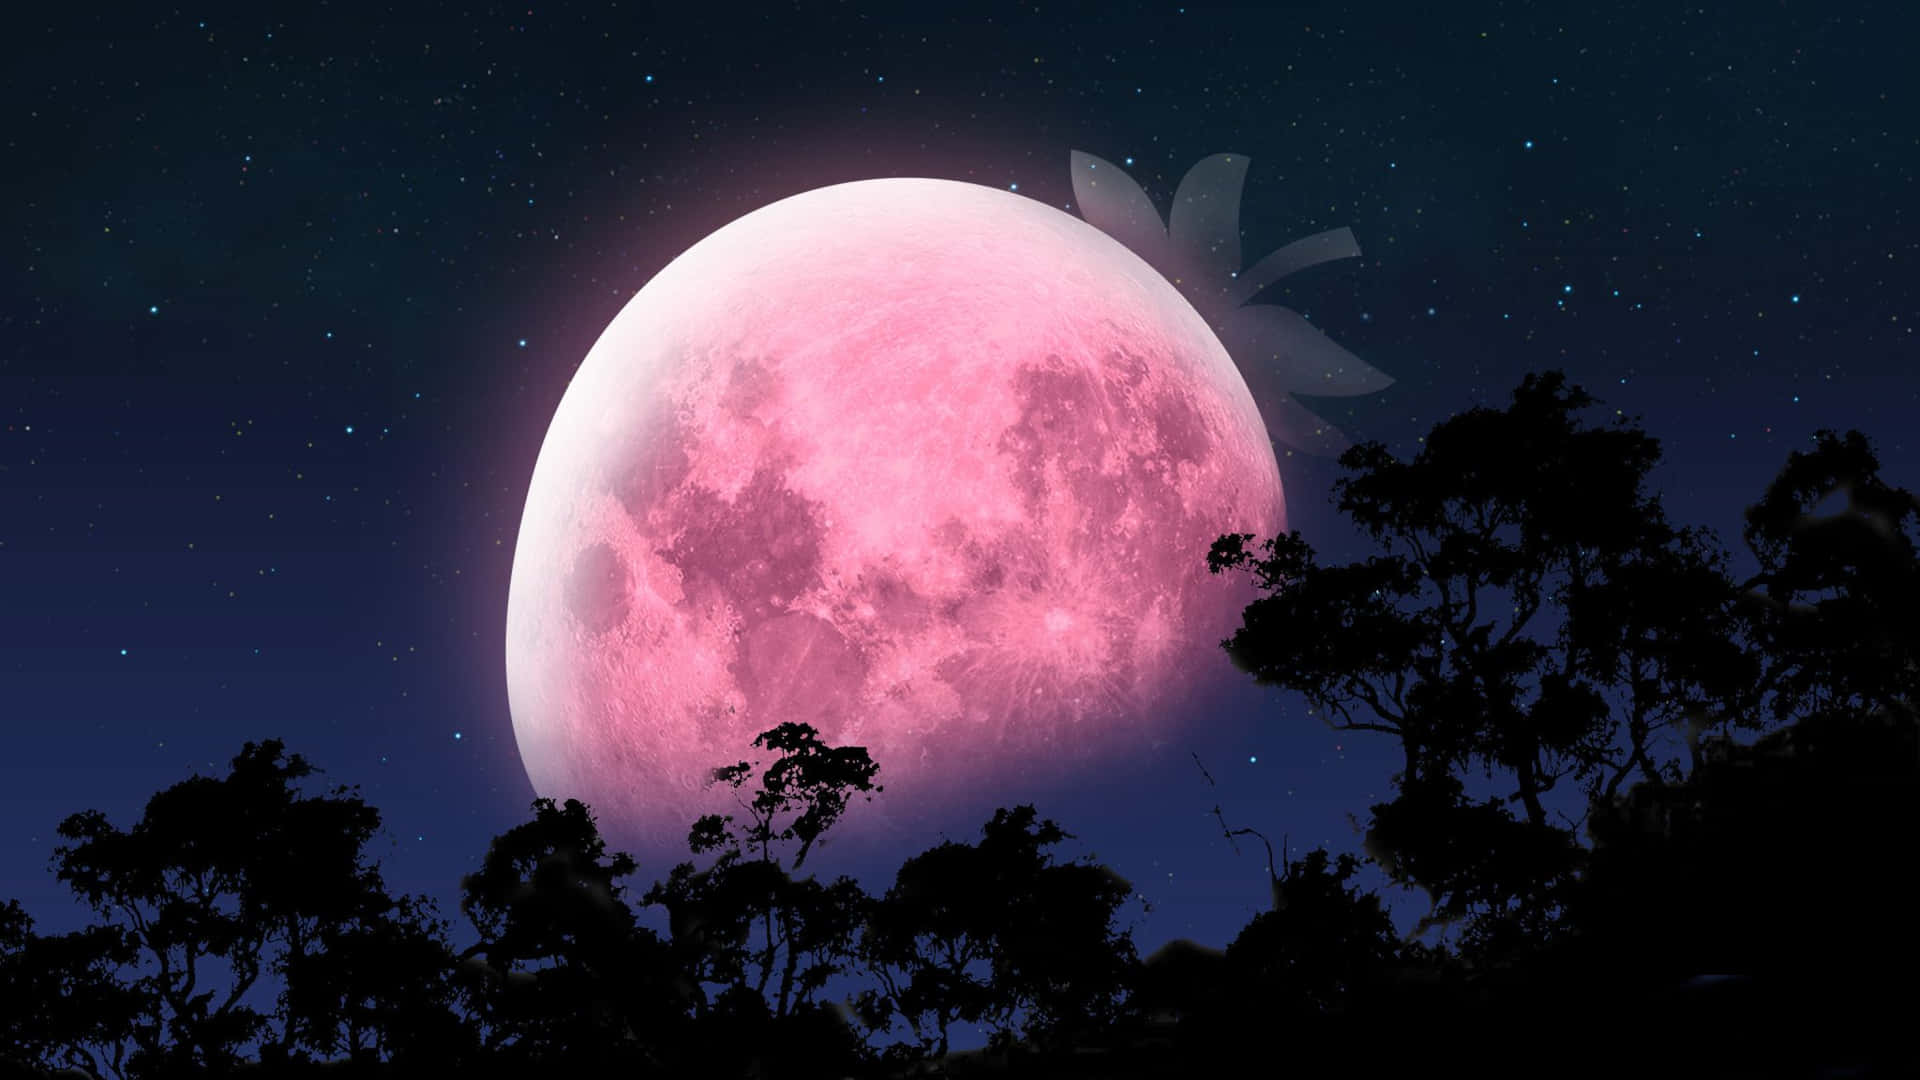 Captivating Pink Moon in the Night Sky